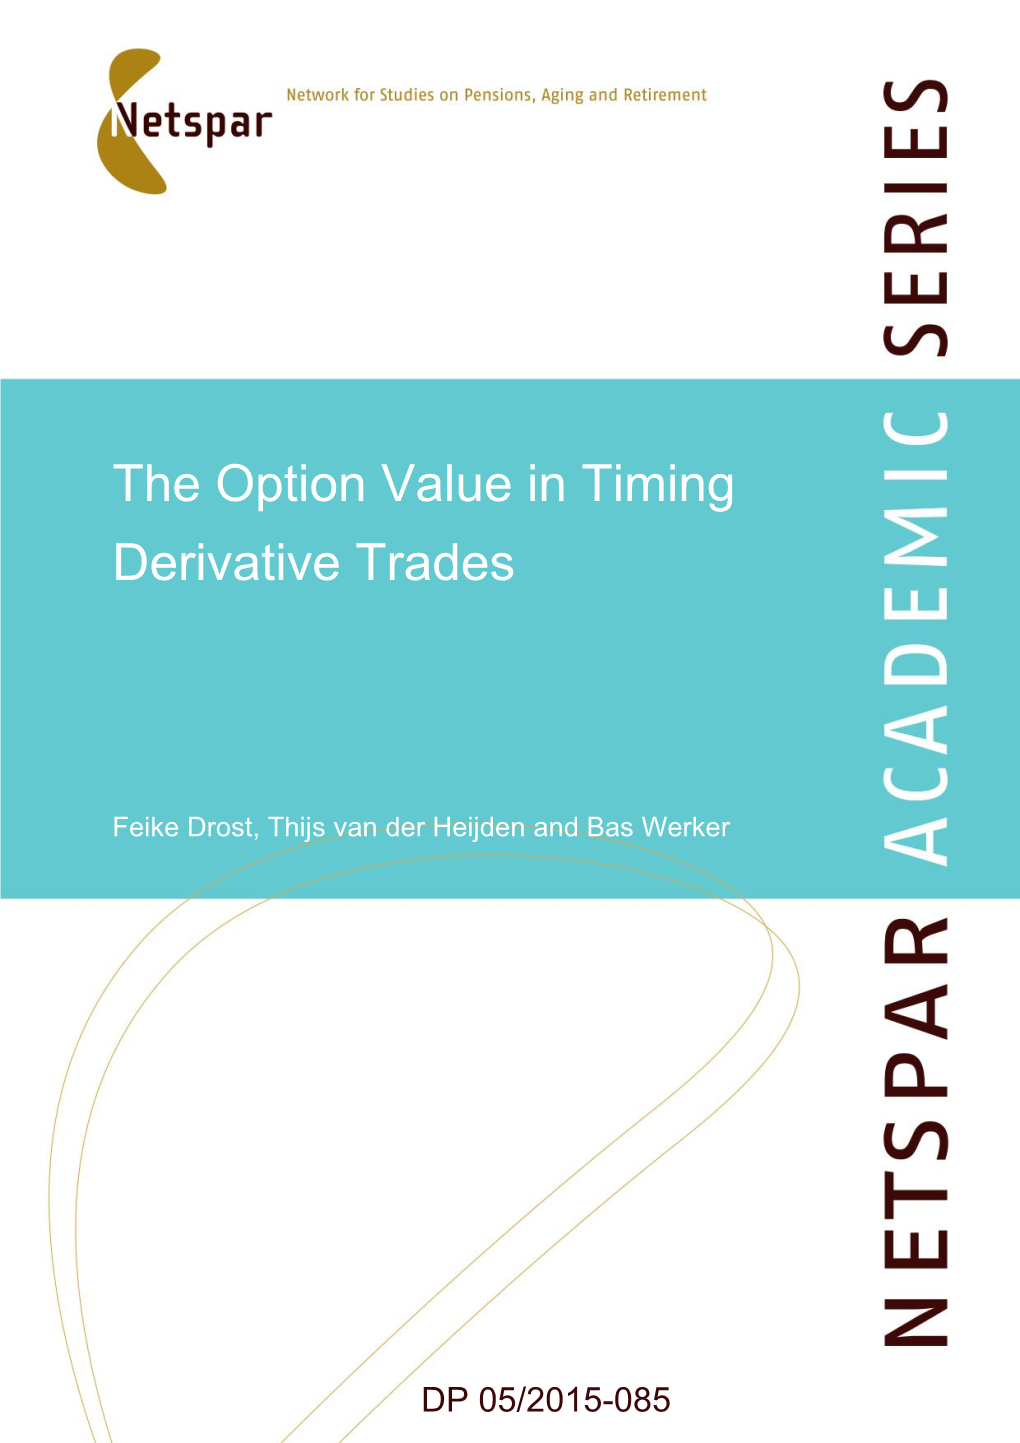 The Option Value in Timing Derivative Trades